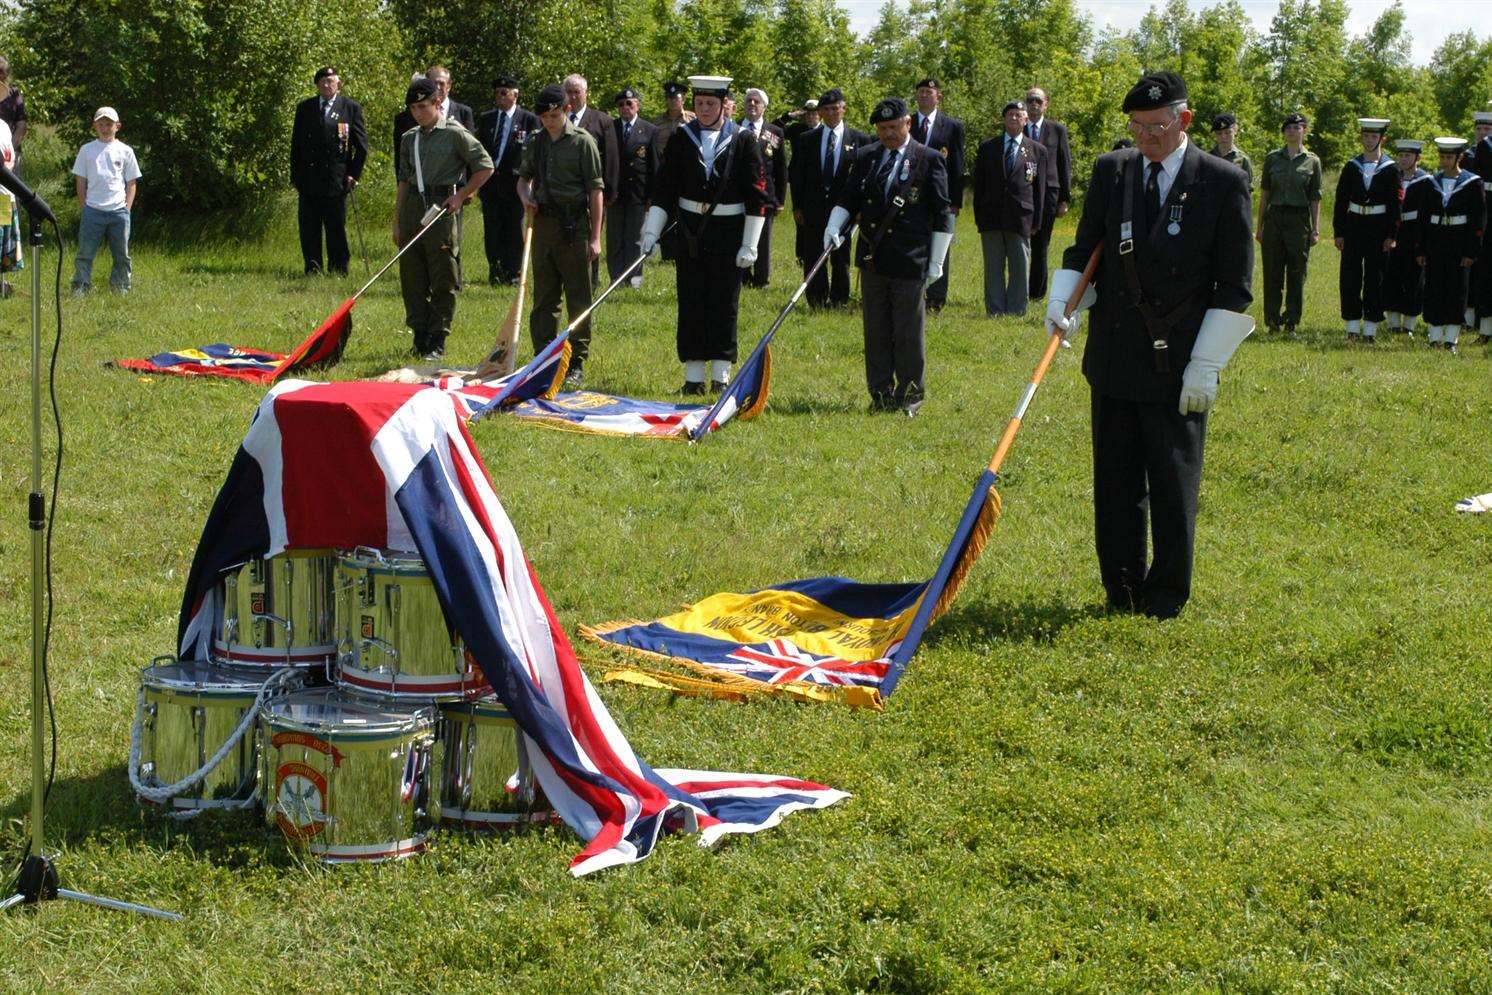 When no church was available for a service, a temporary alter would traditionally be constructed from the regiment's drums